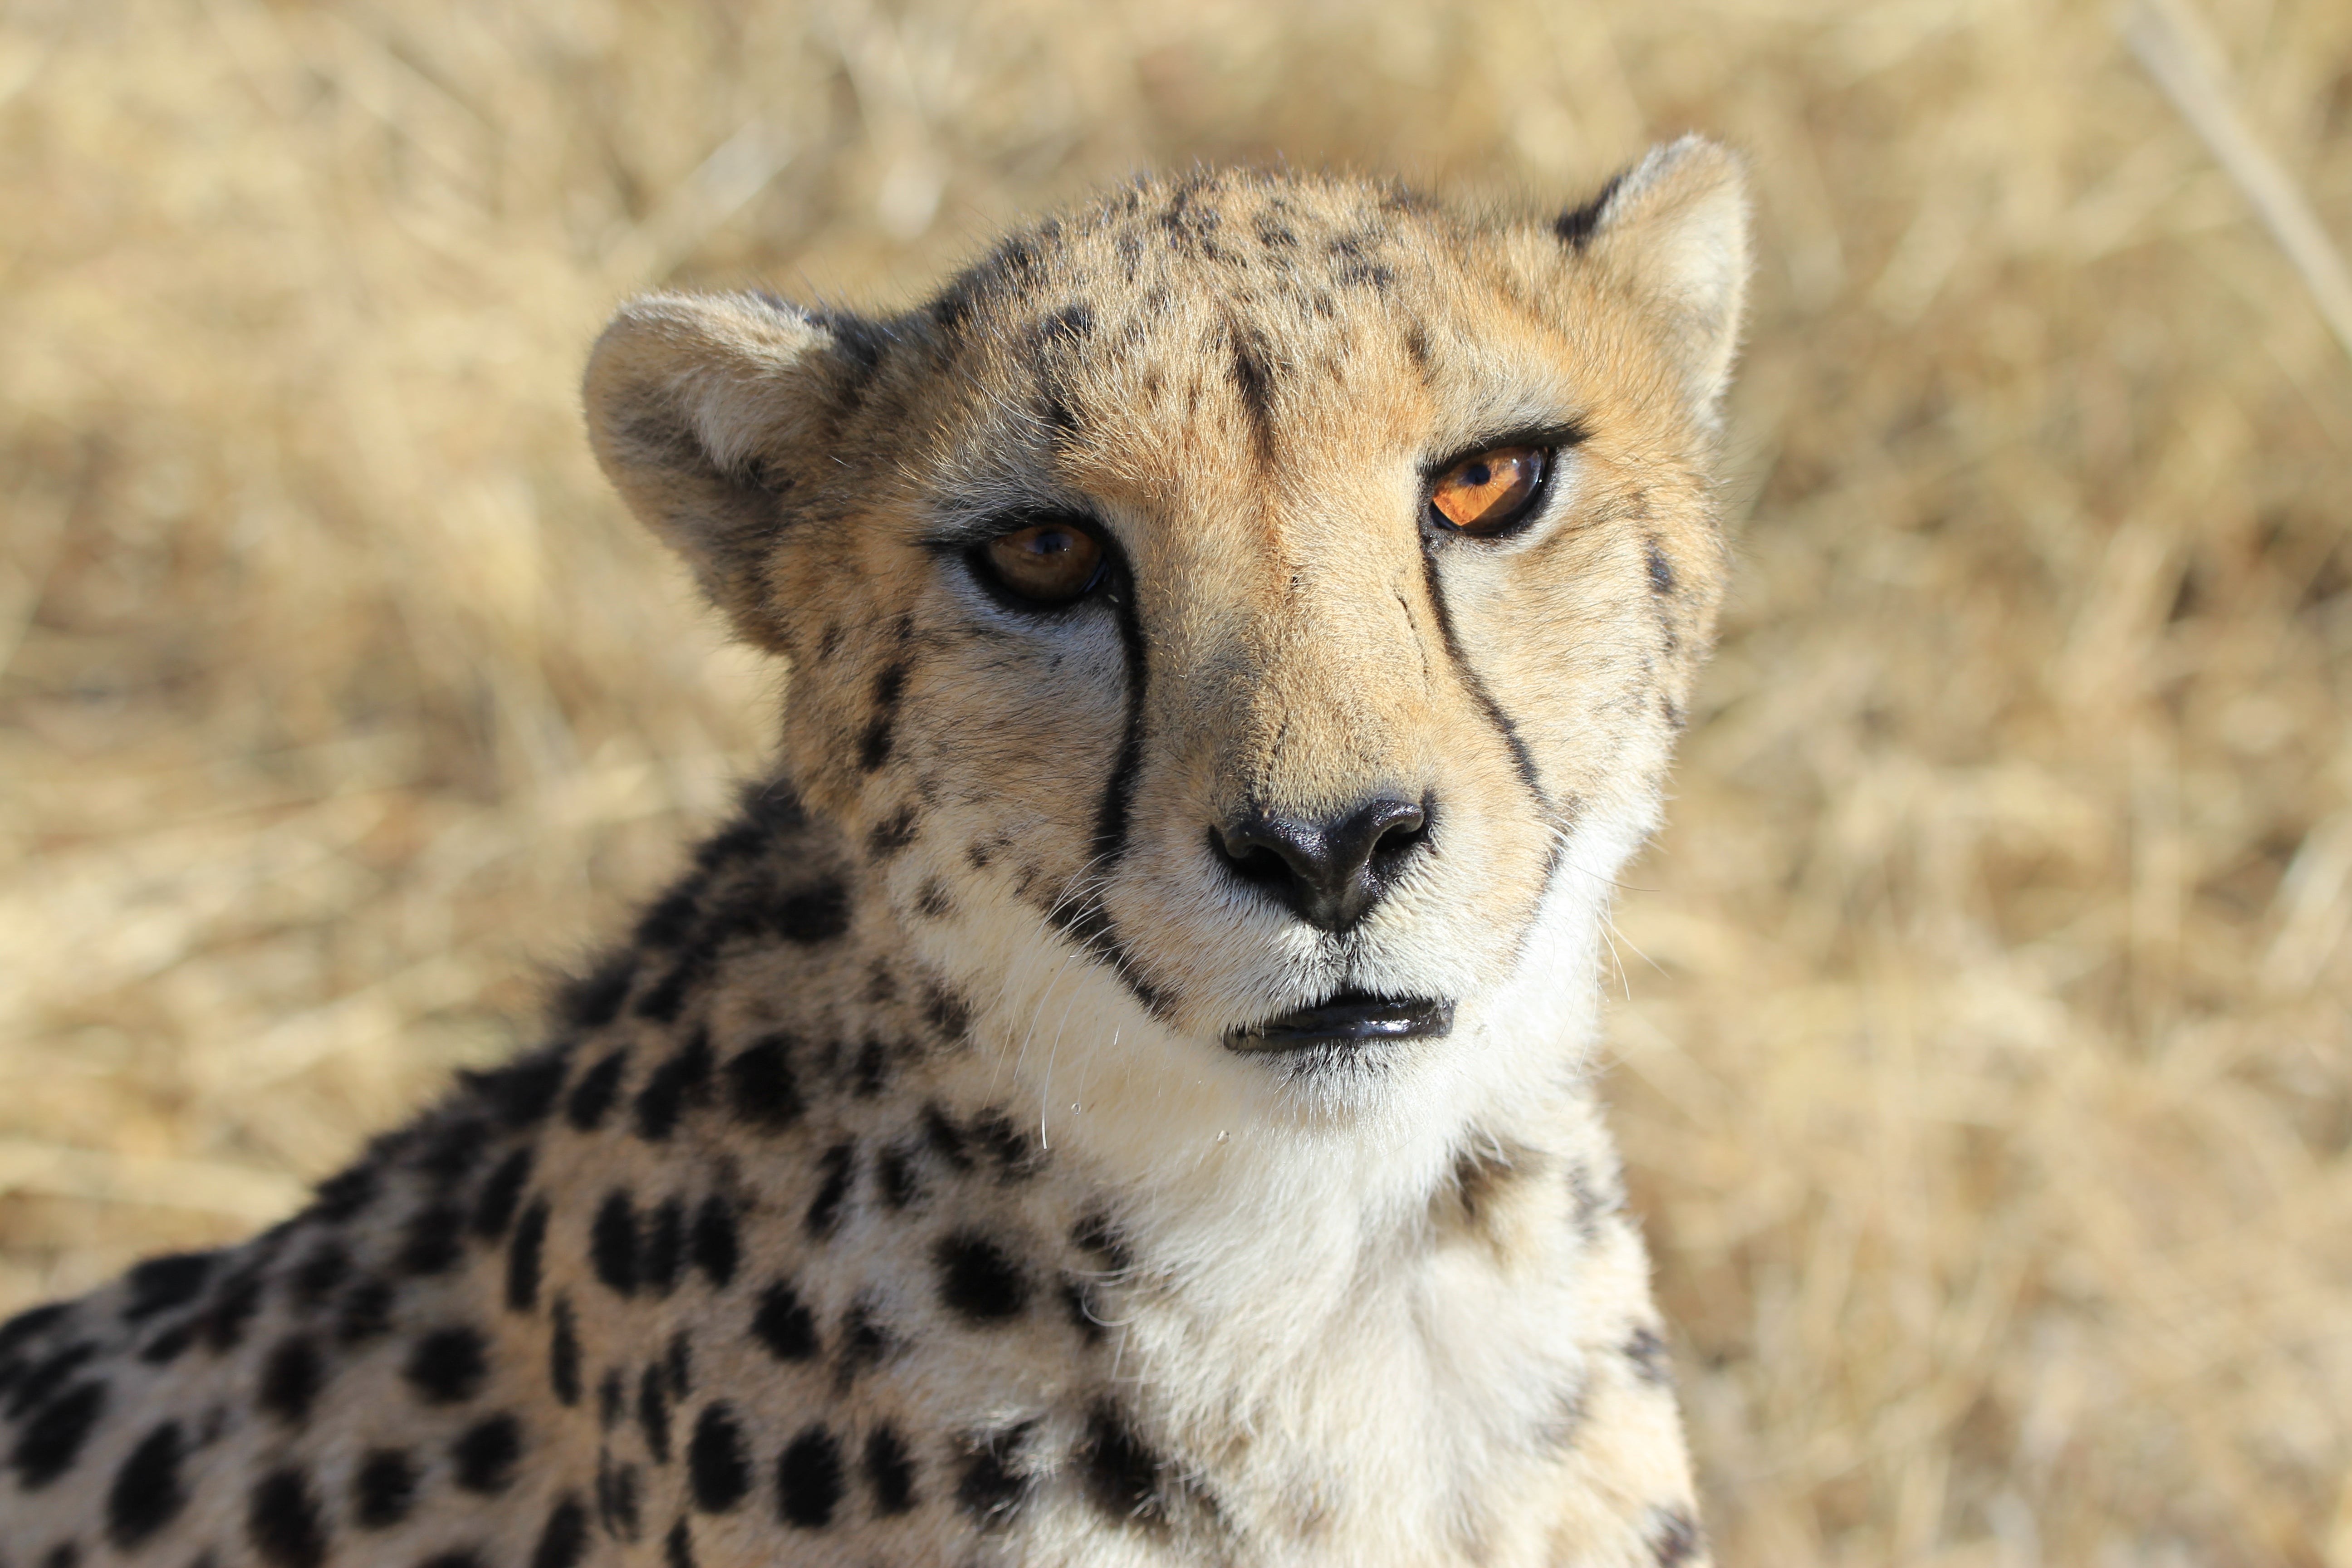 One of the five female cheetahs being sent to India was picked up from a farm located in the northwestern part of Namibia close to the village of Kamanjab in February 2019